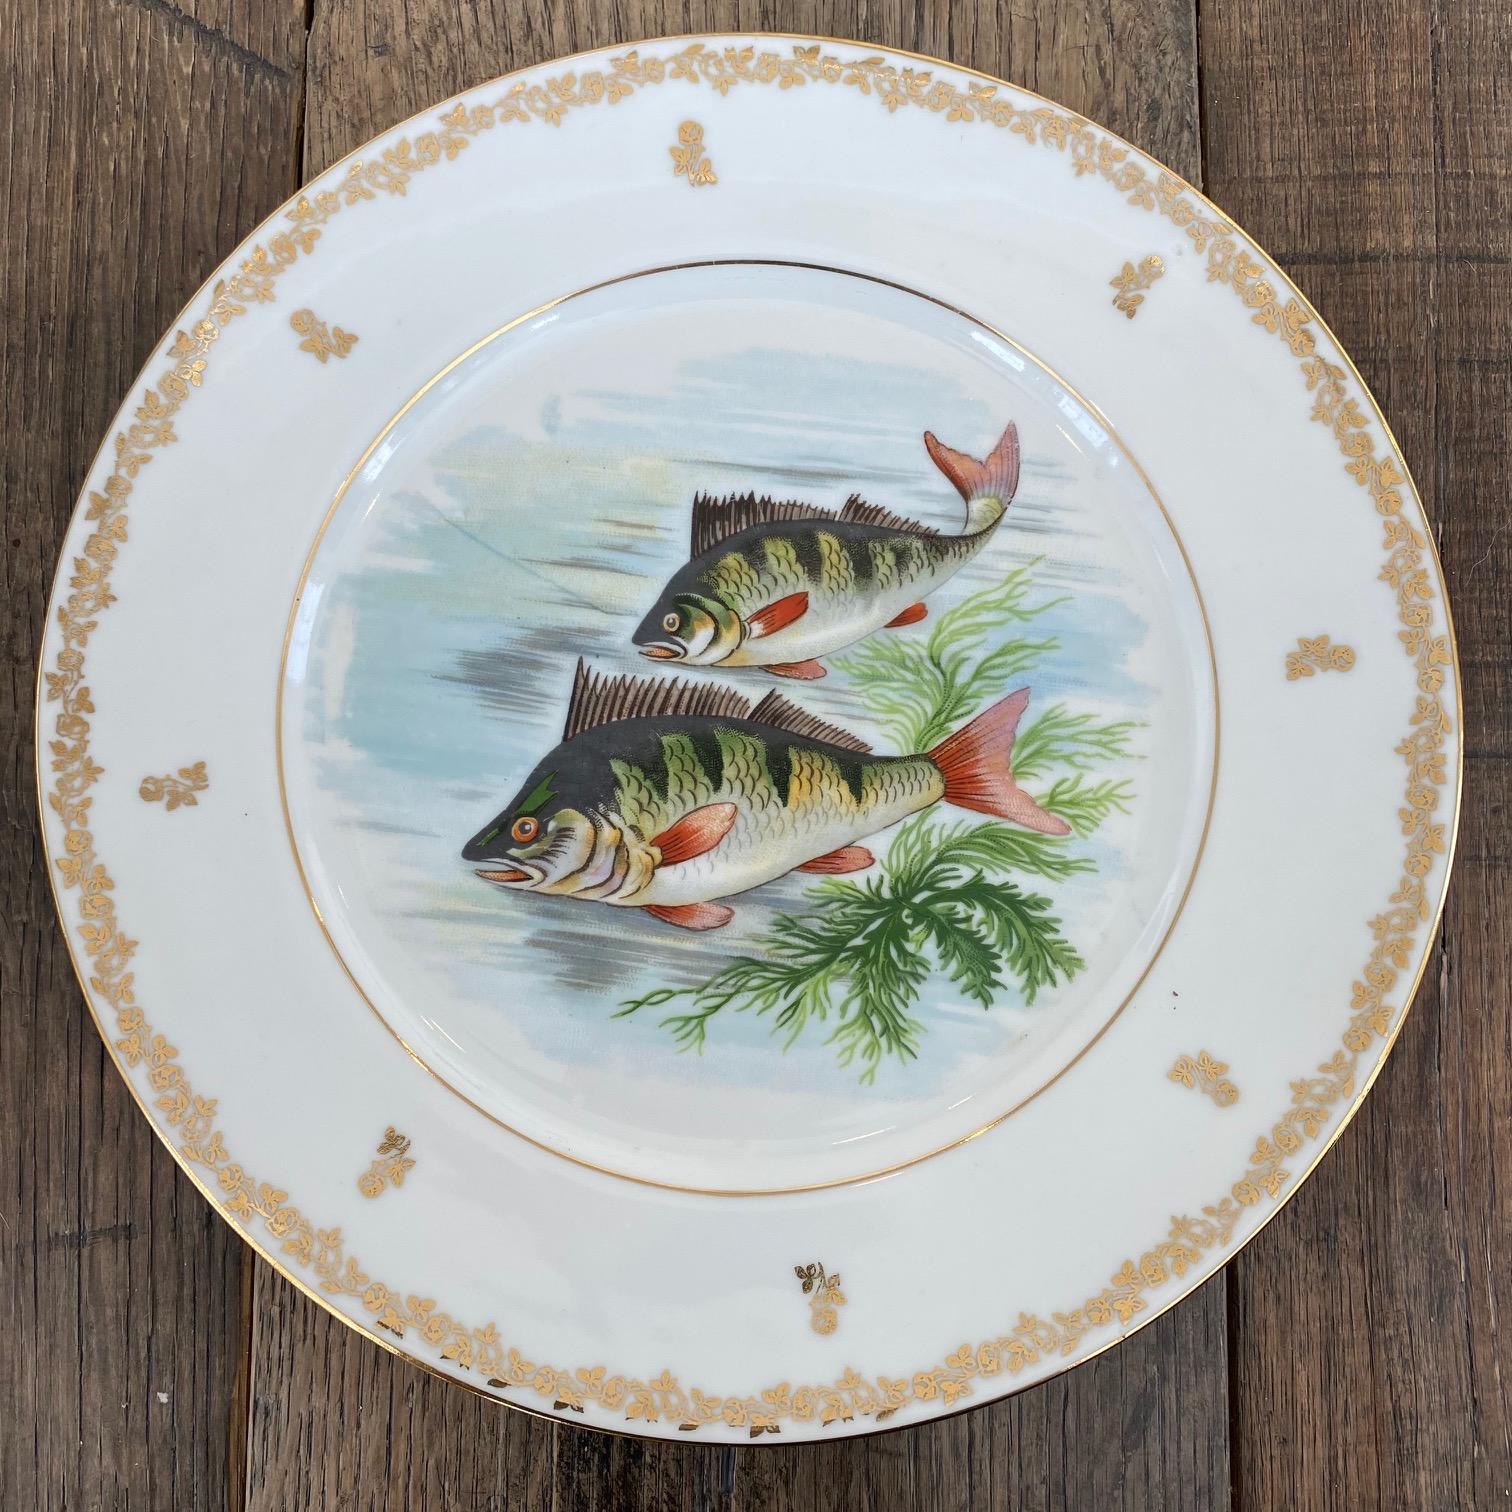 Set of Ten Hand Painted Fish Dinner Plates from Limoges 1